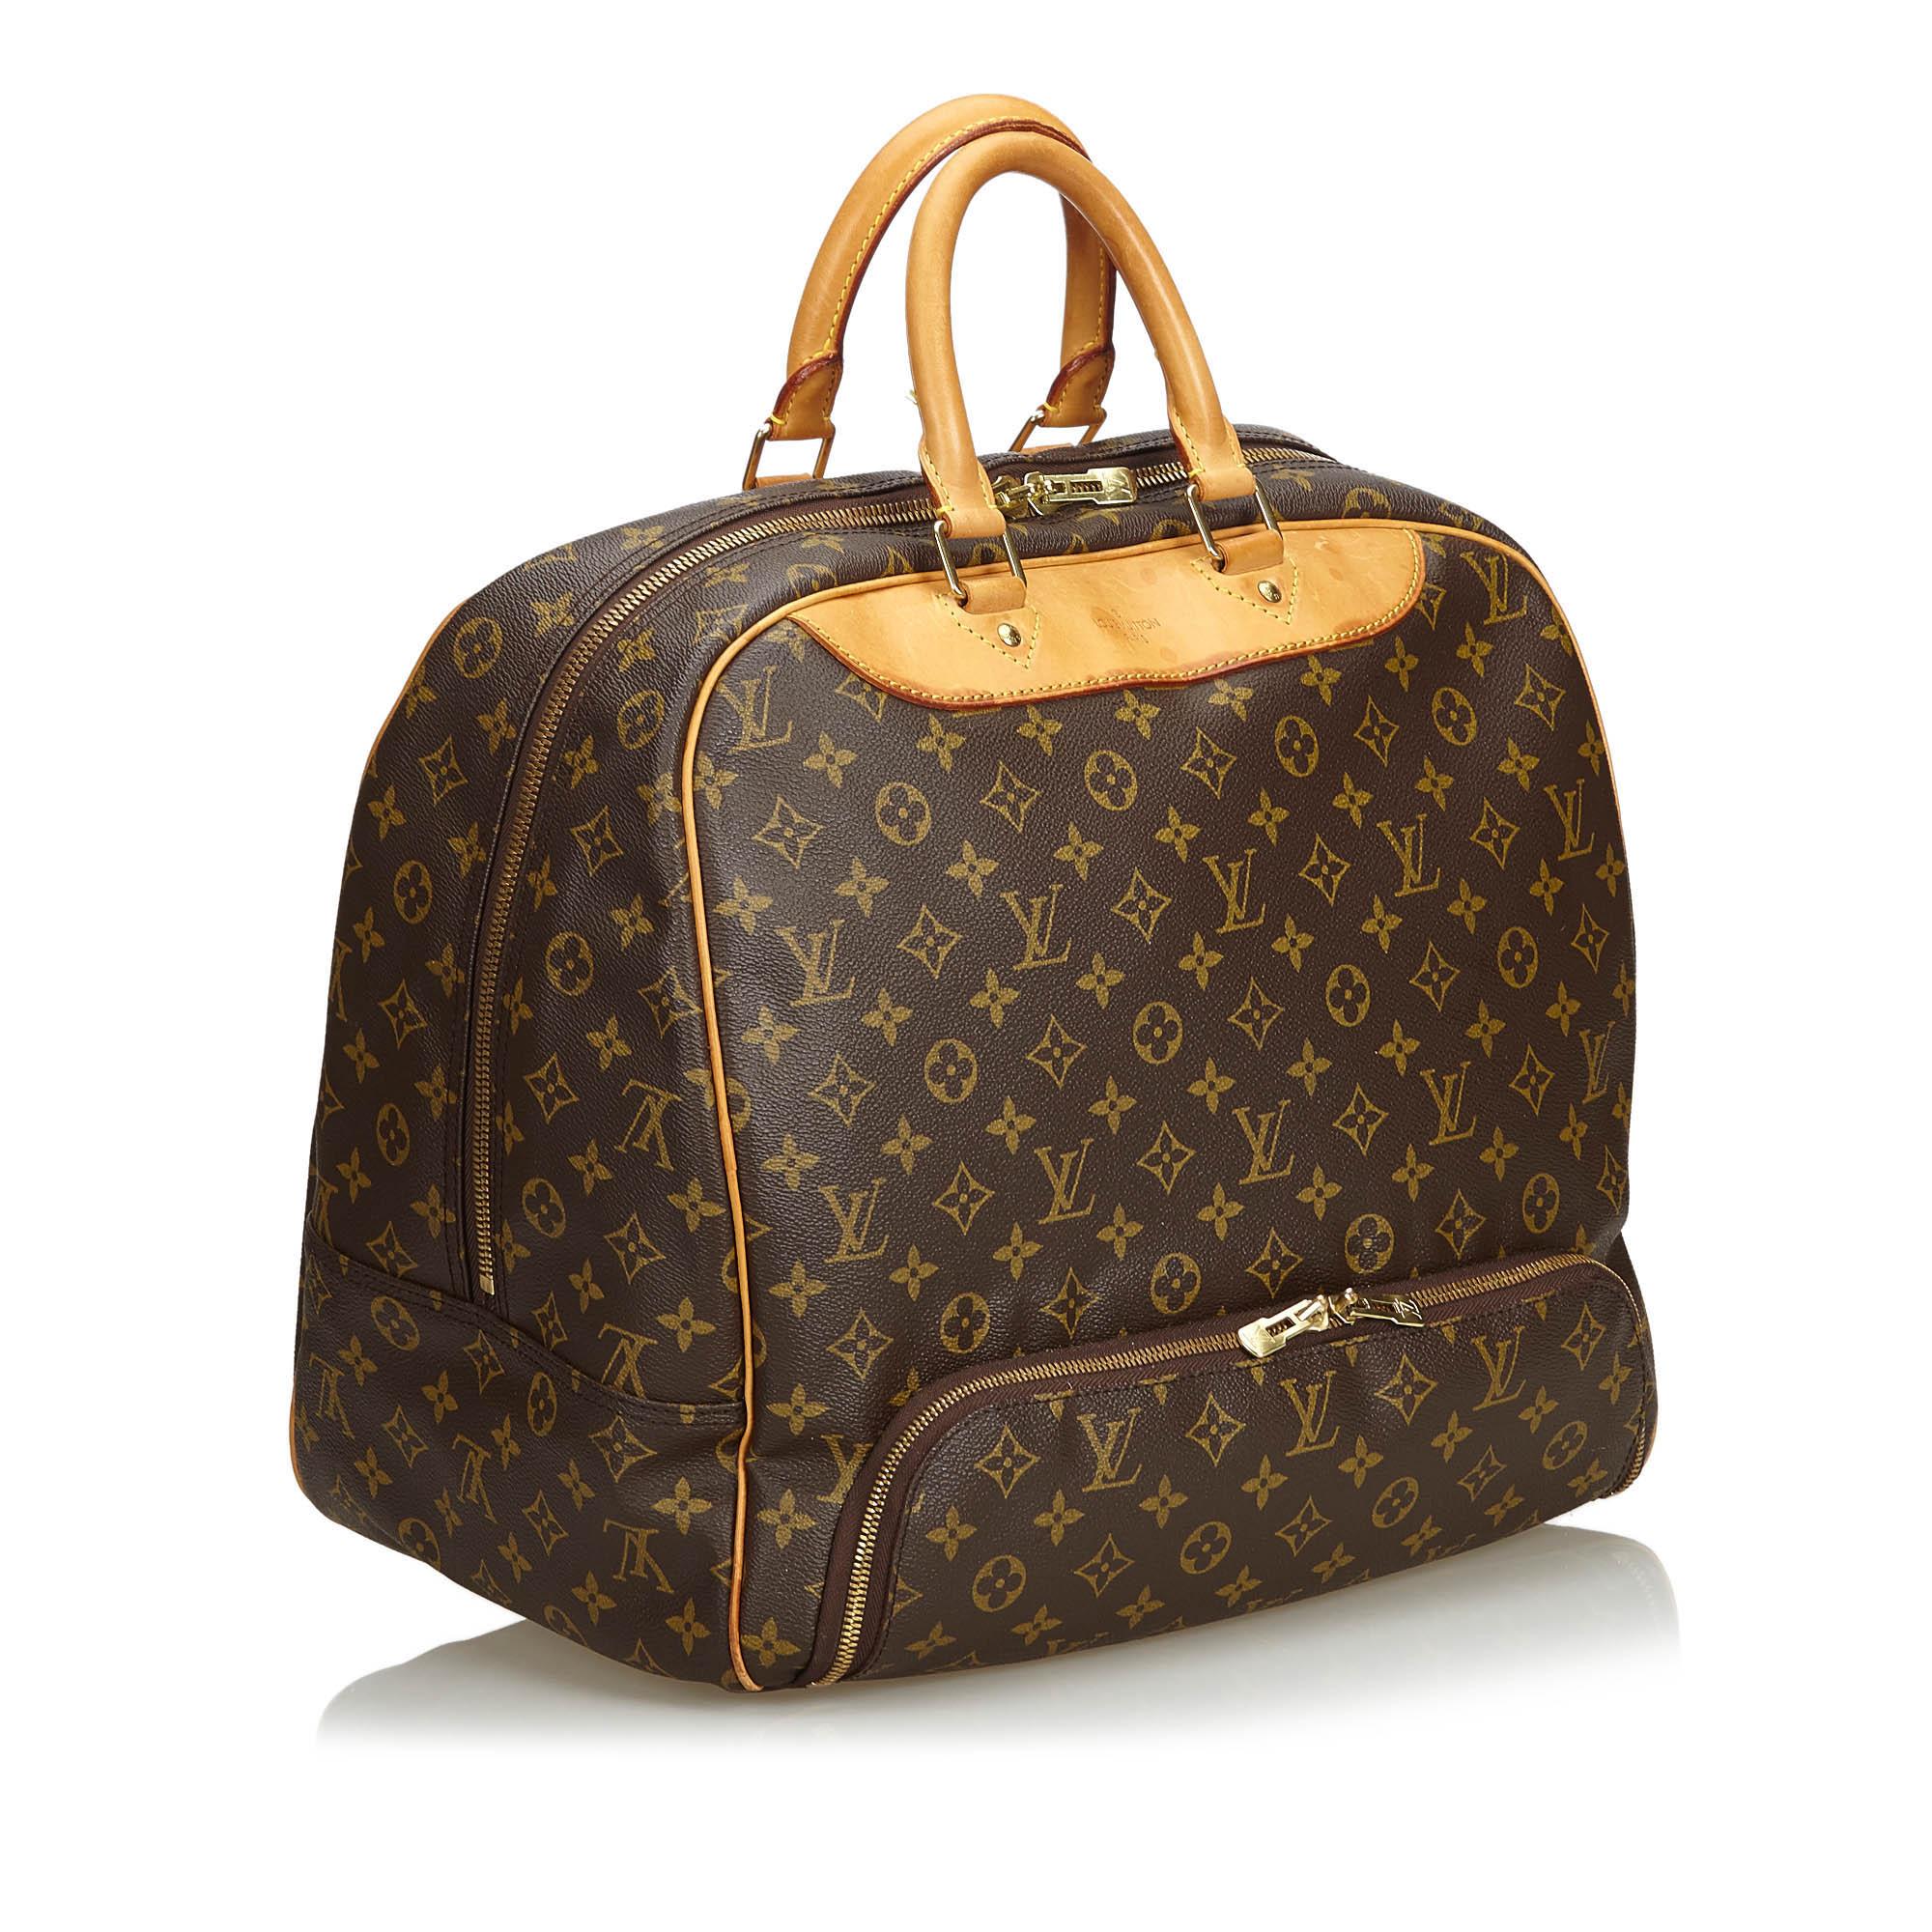 The Evasion features a monogram canvas body, rolled vachetta leather handles, a front exterior zip pocket, a top zip closure, and an interior slip pocket. It carries as B condition rating.

Inclusions: 
This item does not come with